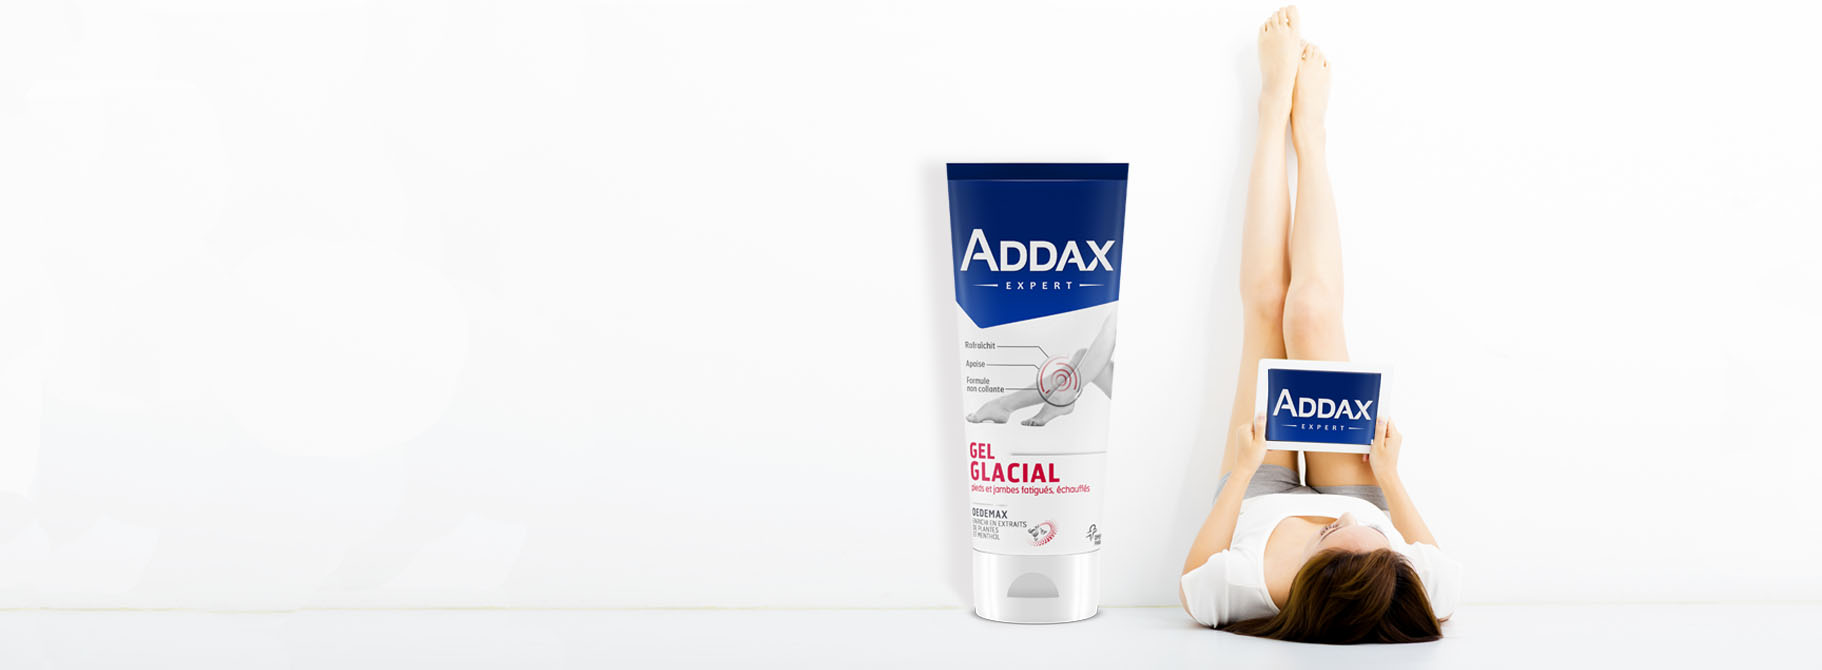 agence-packaging-sante-health-by-agency-design-addax